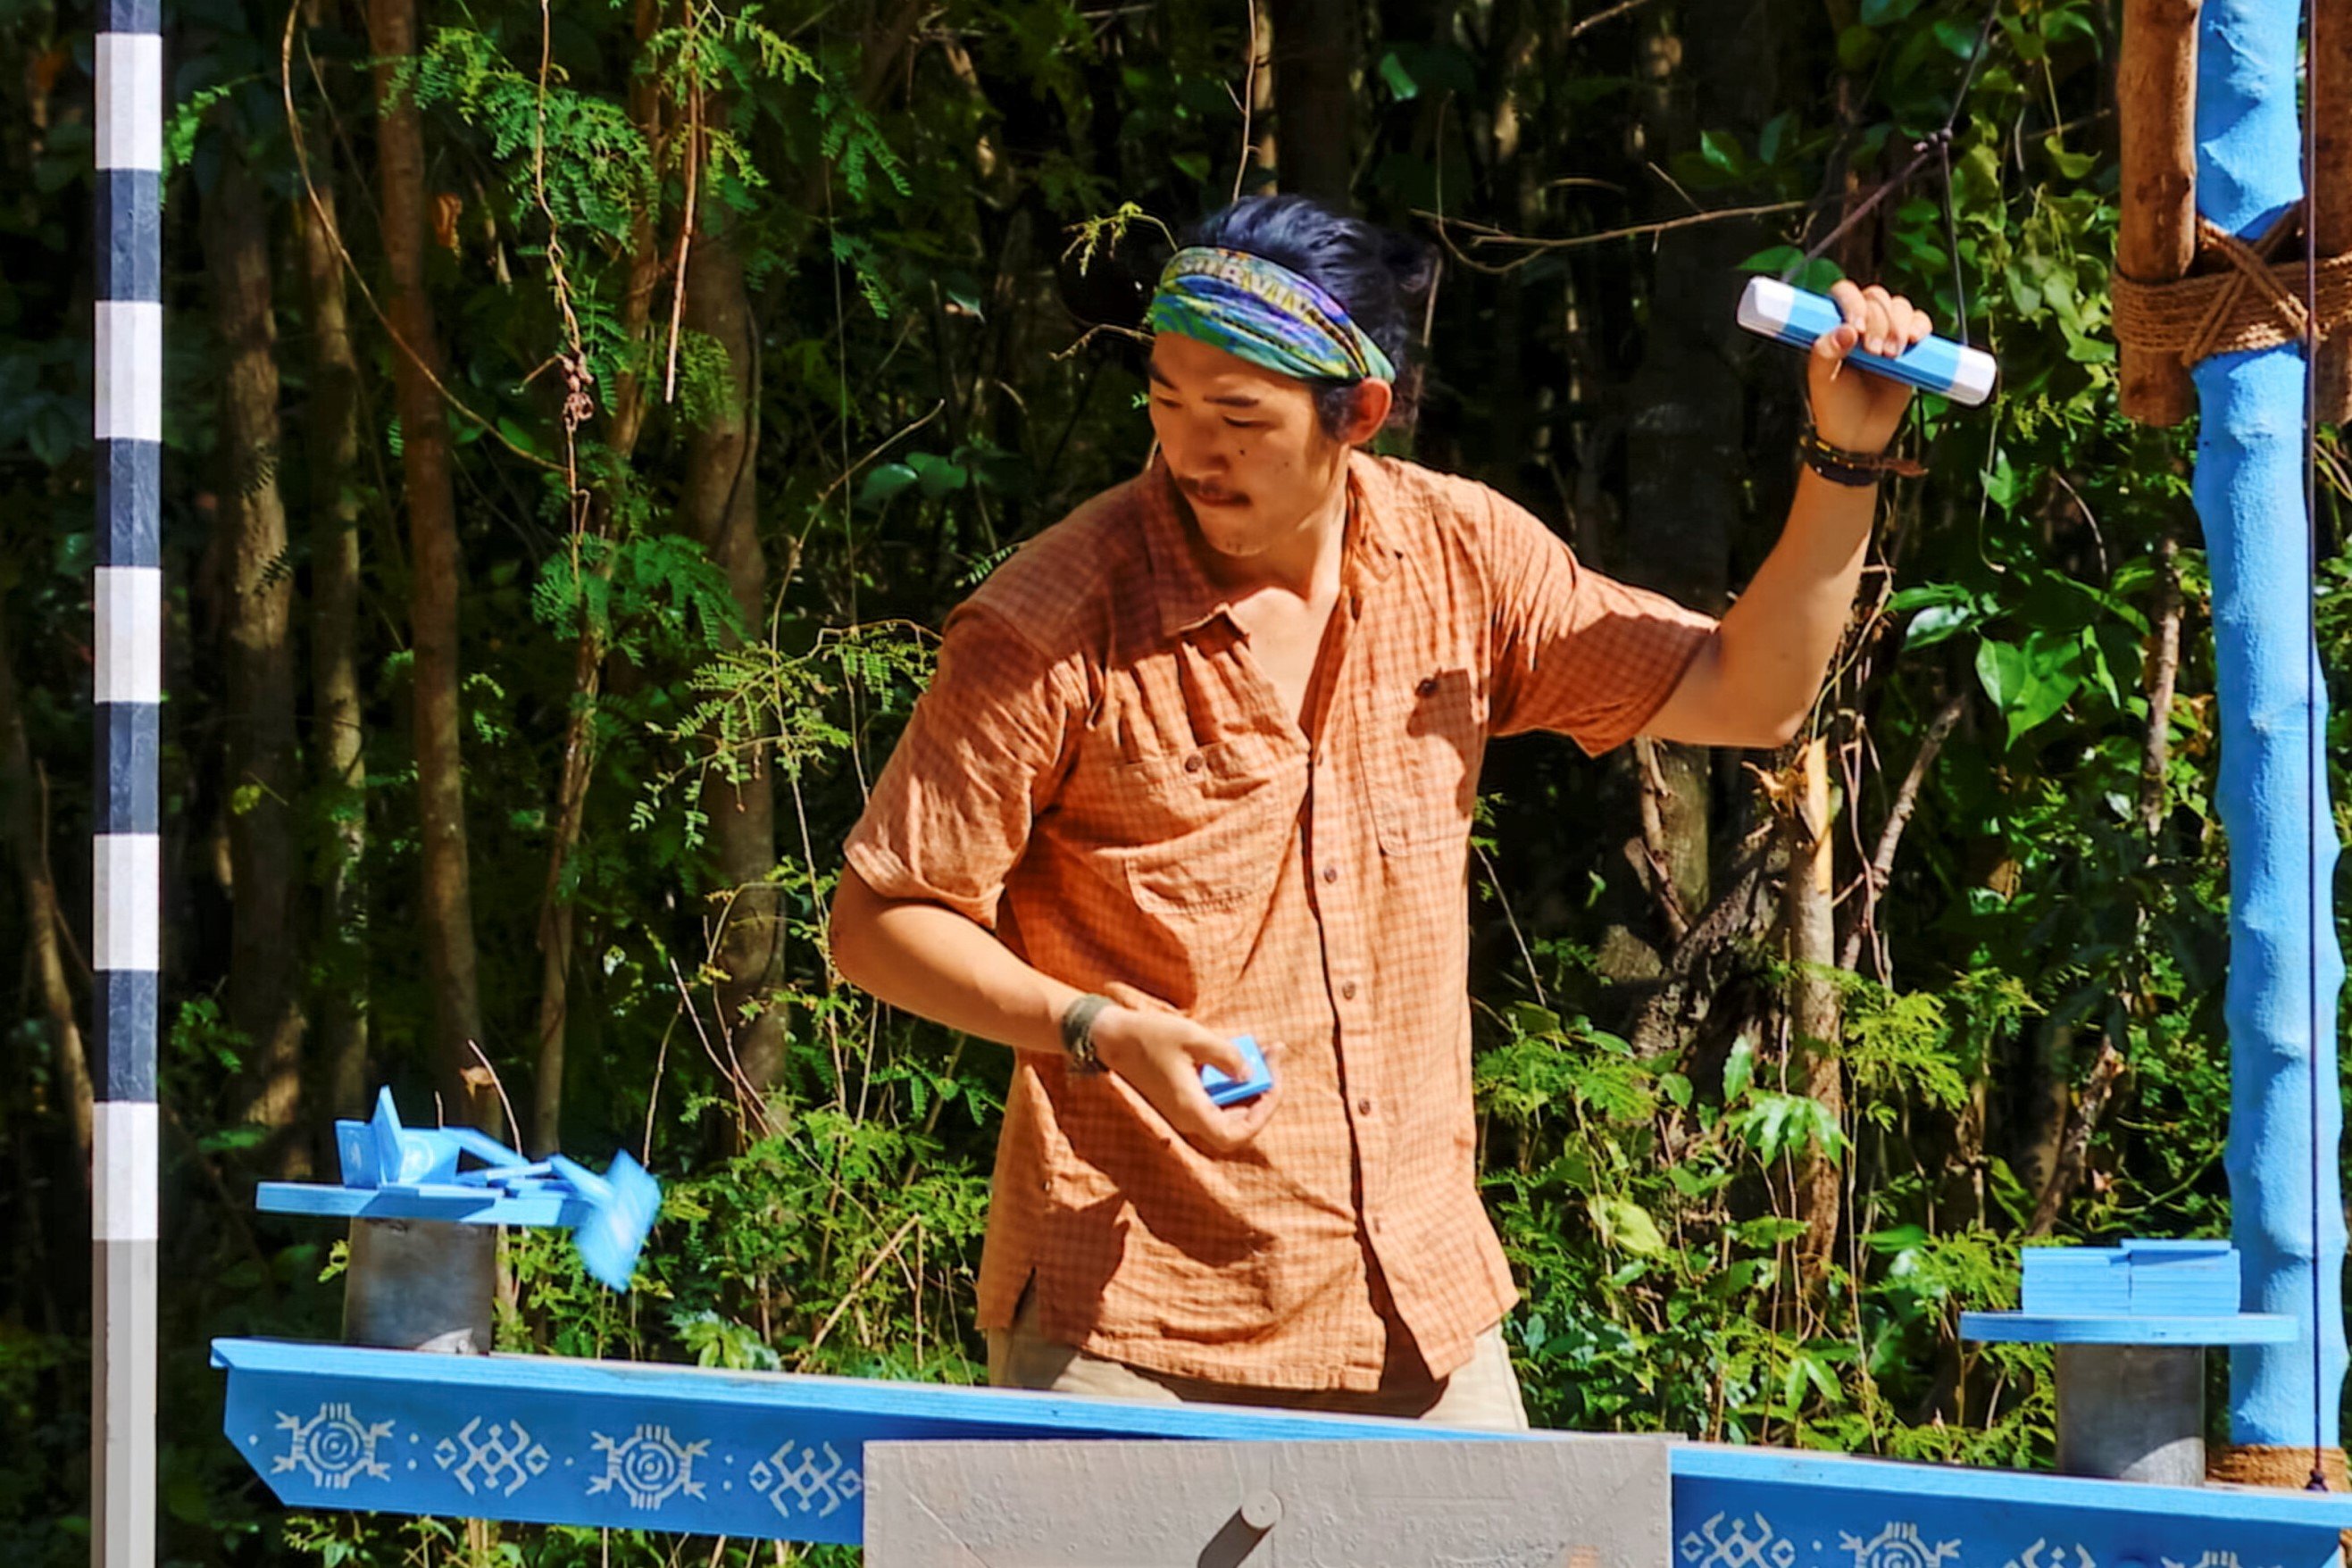 Owen Knight, who according to fans and spoilers, will make it to the Final Tribal Council in 'Survivor' Season 43 on CBS, competes in a challenge.